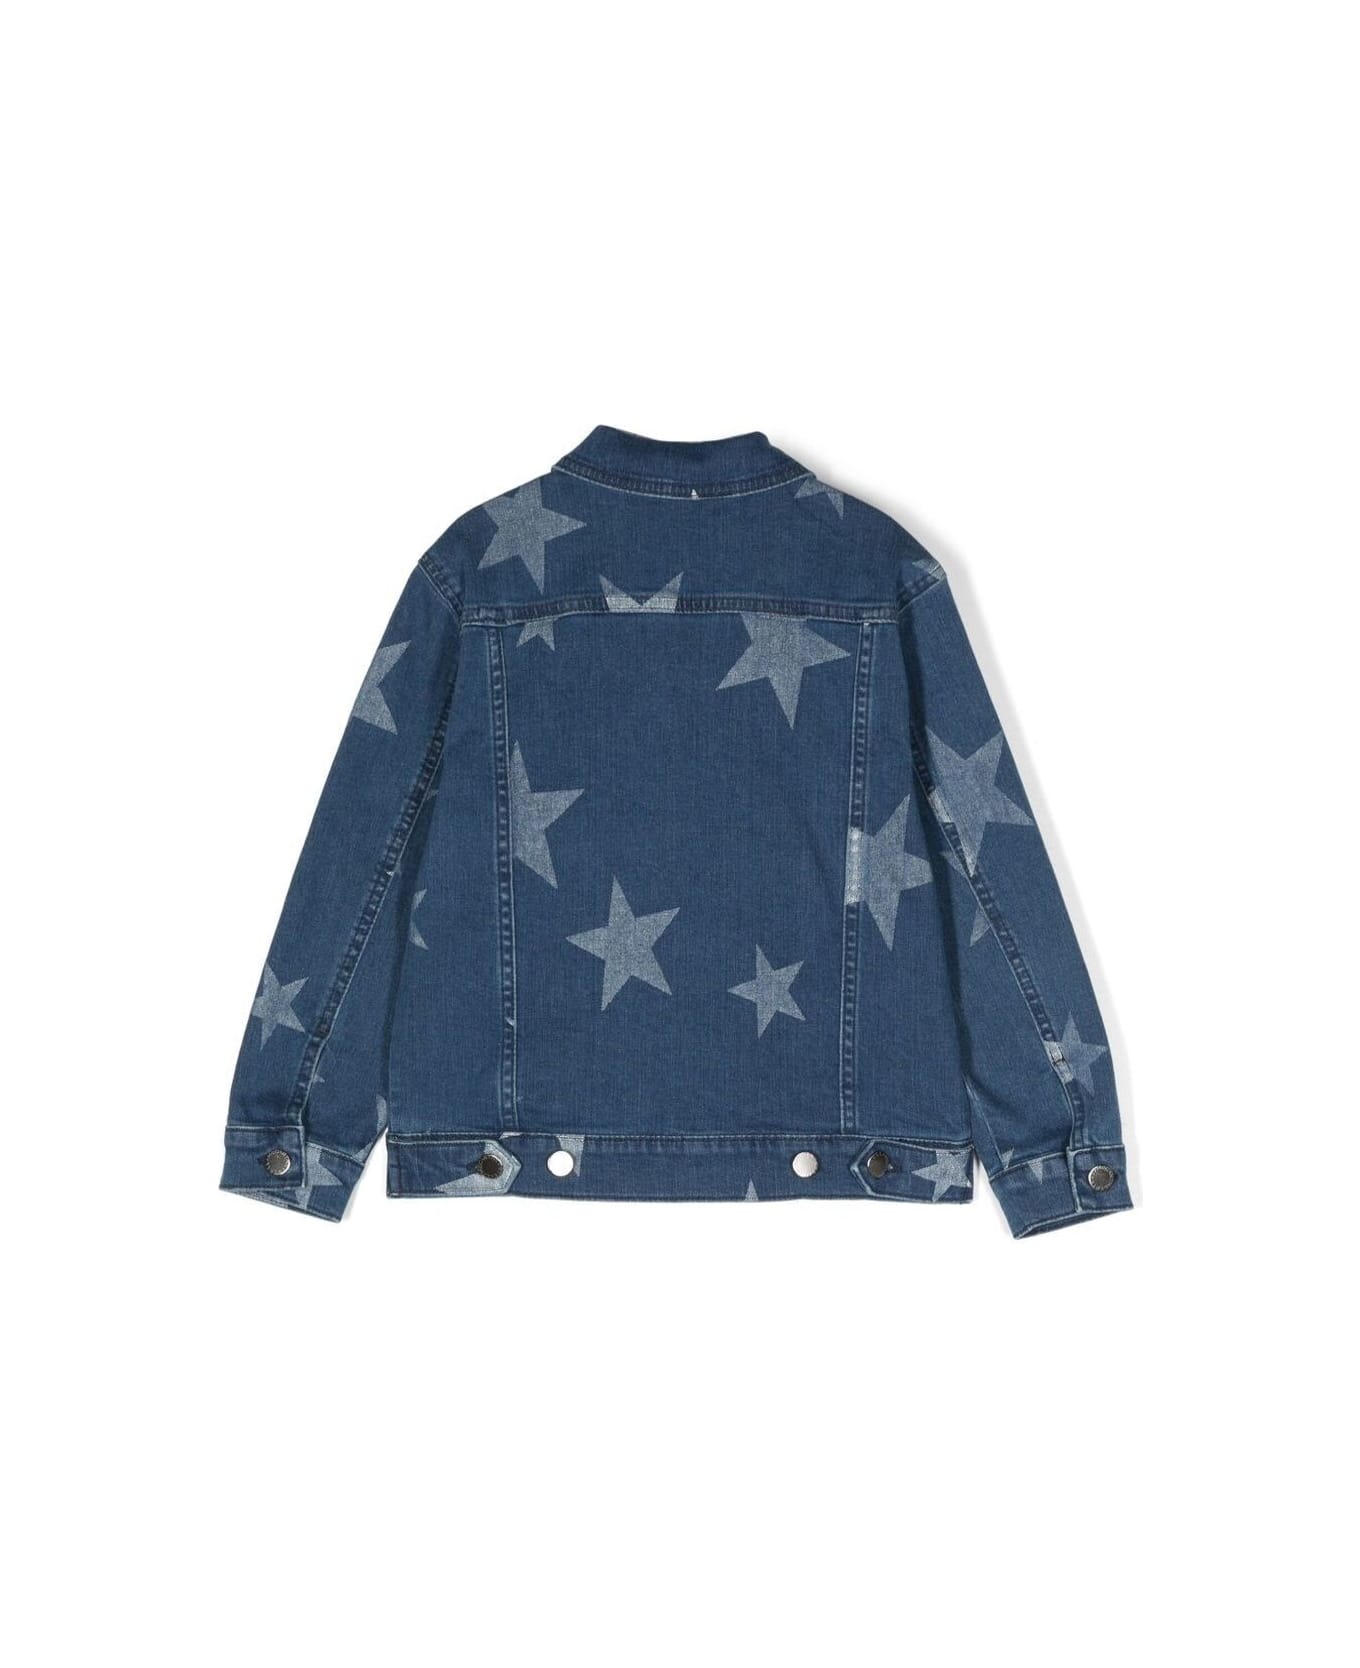 Stella McCartney Kids Jeans Jacket With Star Print In Stretch Cotton Girl - Blue コート＆ジャケット